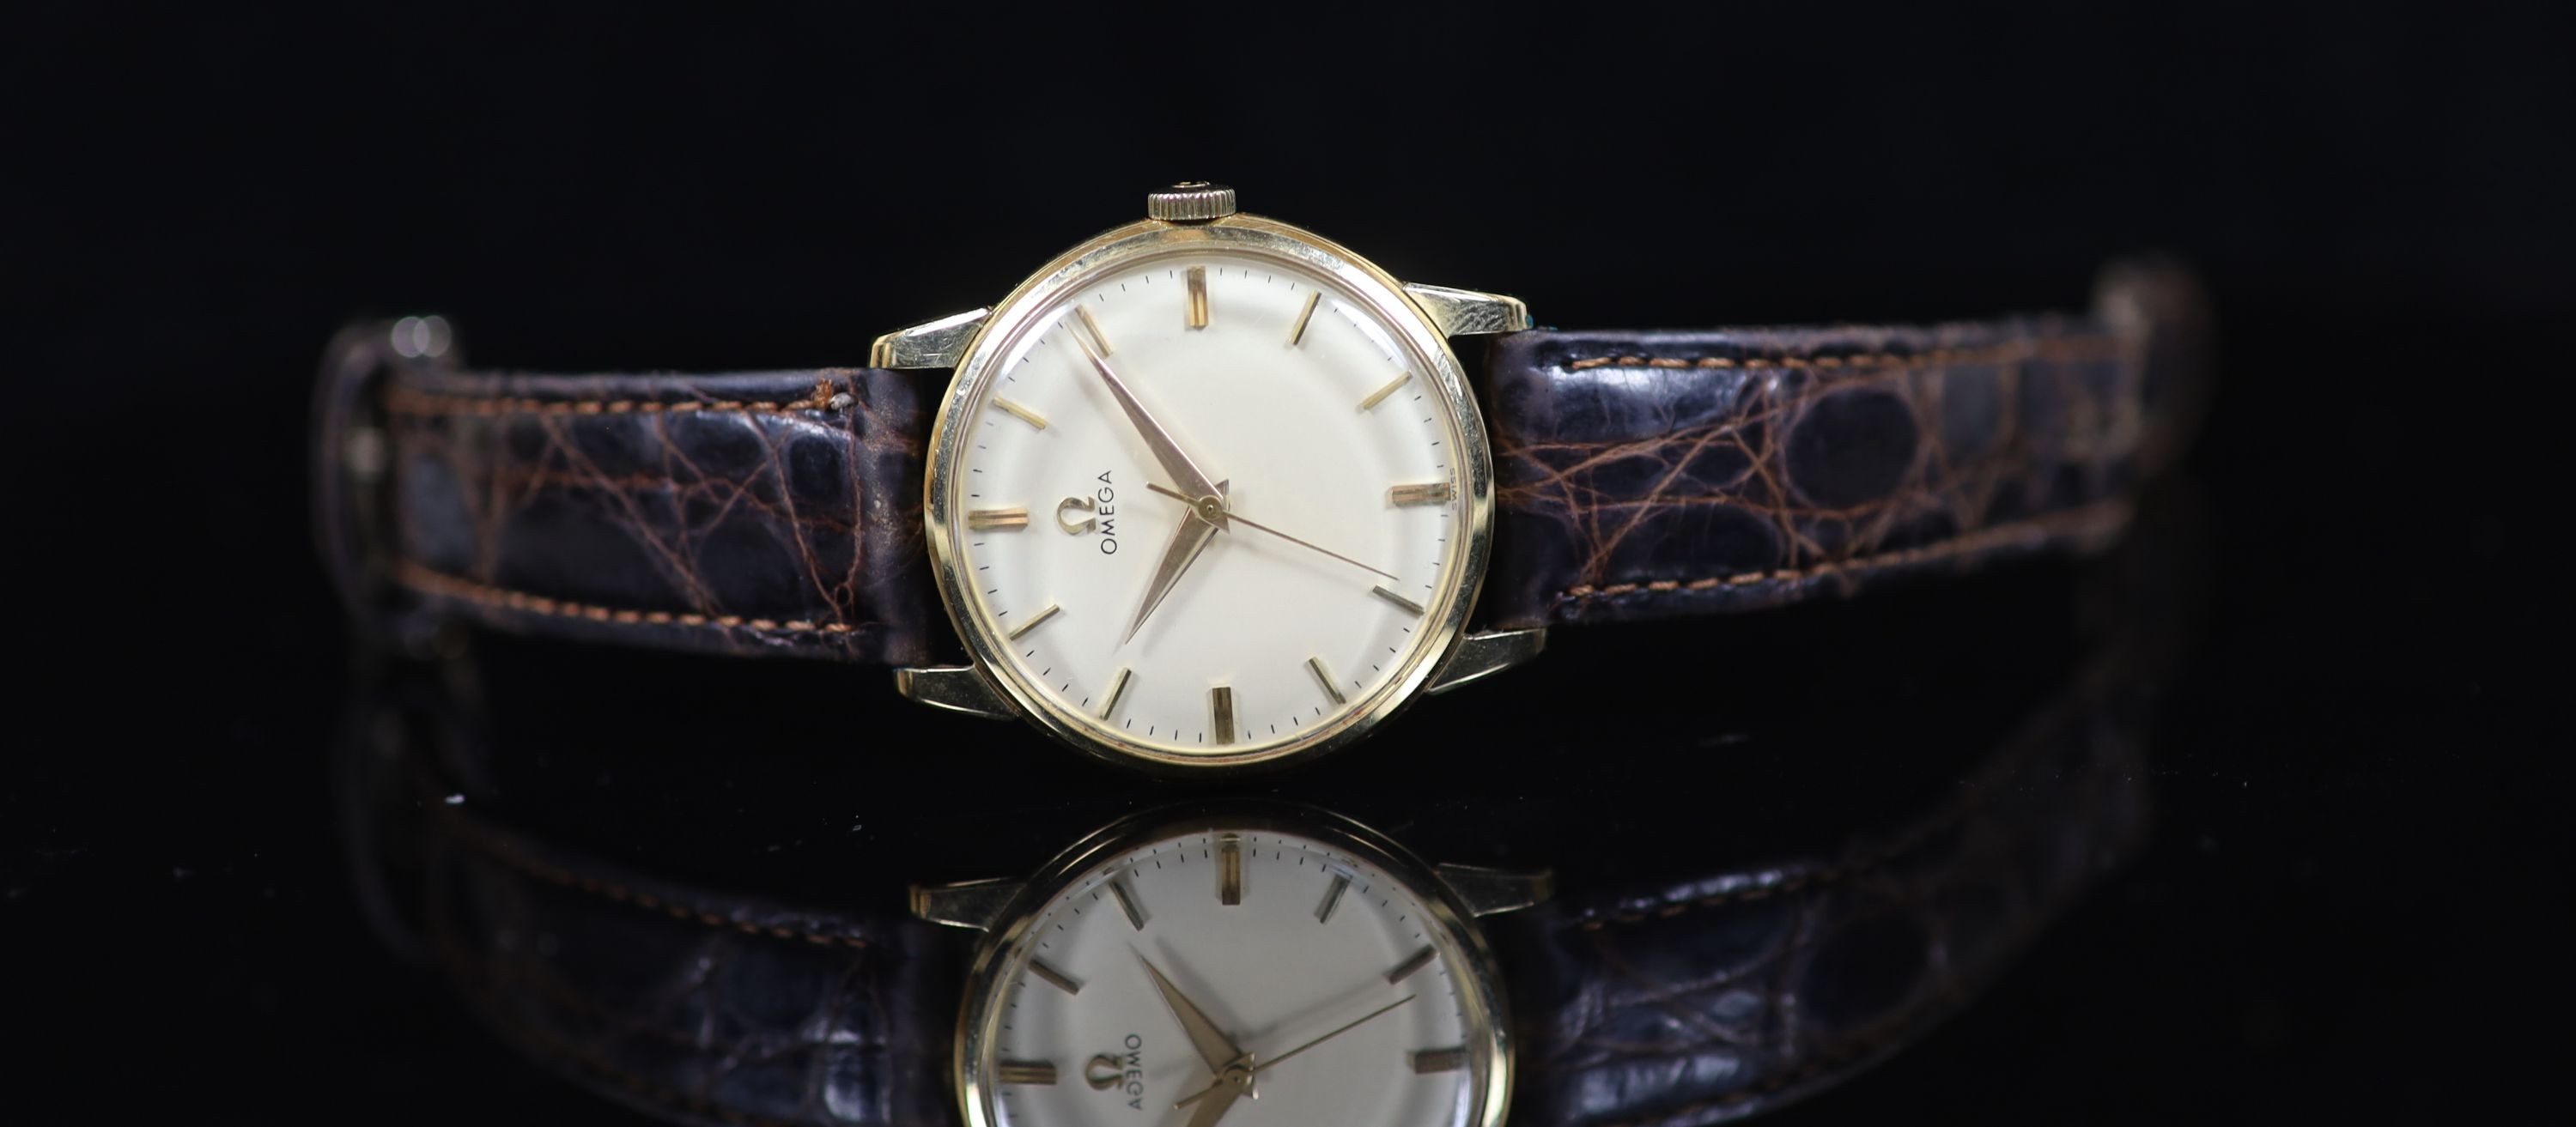 A gentleman's late 1950's 14ct gold Omega manual wind wrist watch,with baton numerals, movement c. - Image 2 of 3